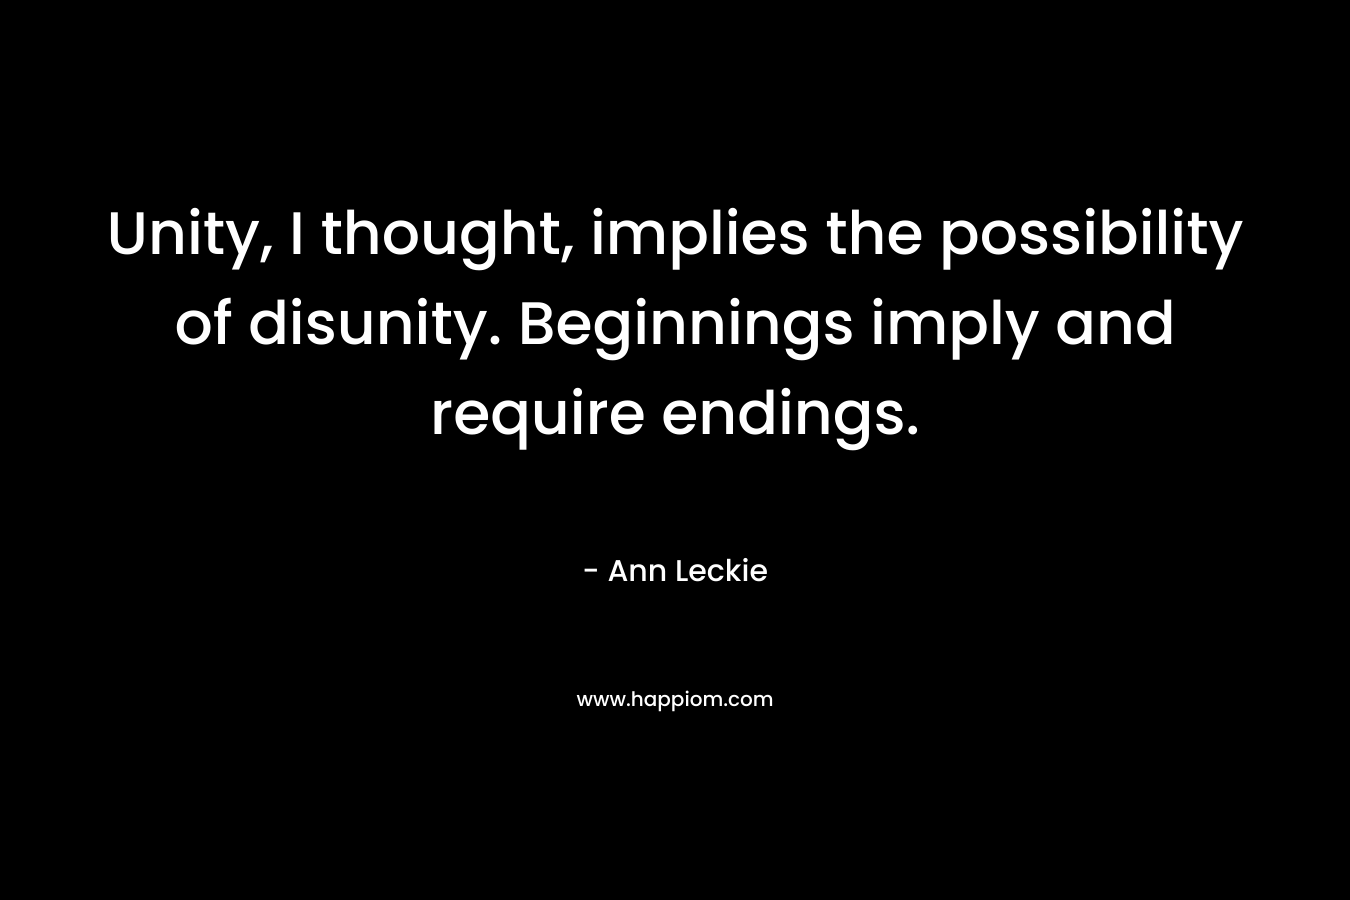 Unity, I thought, implies the possibility of disunity. Beginnings imply and require endings. – Ann Leckie